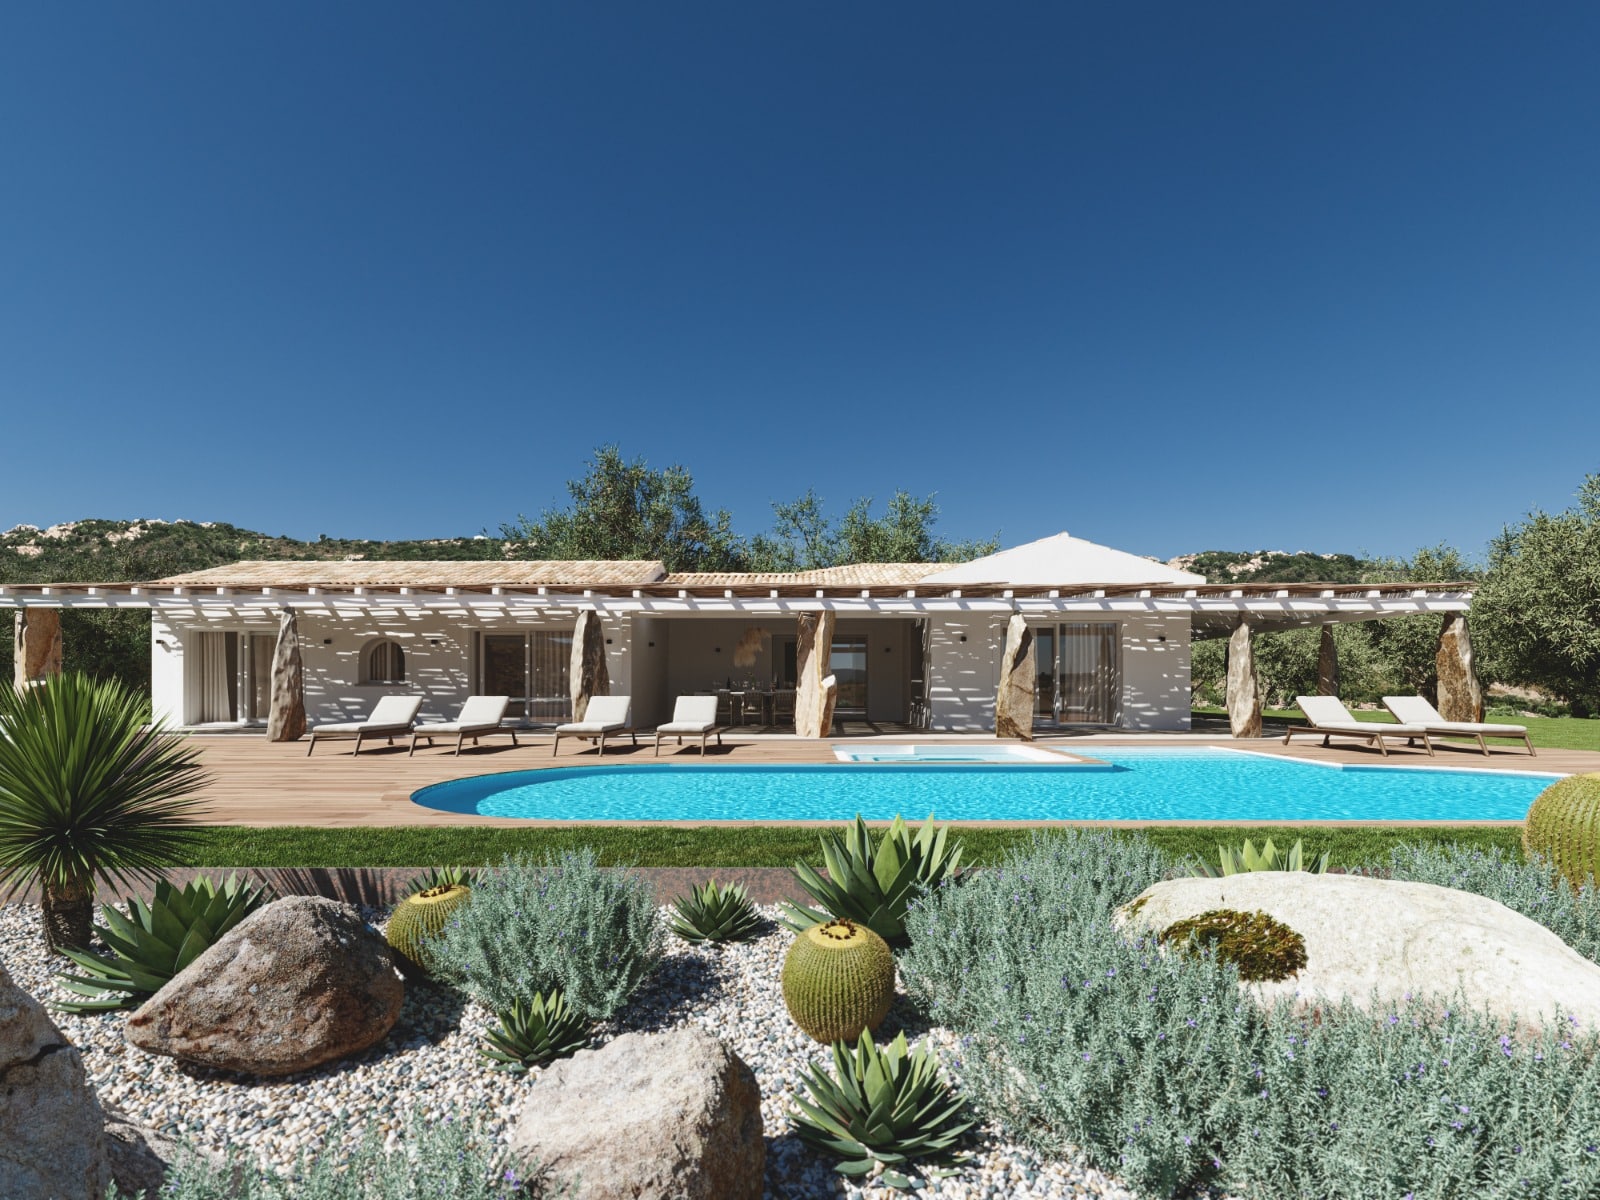 At Home Around The World: An Italian Villa By The Sea in Sardinia